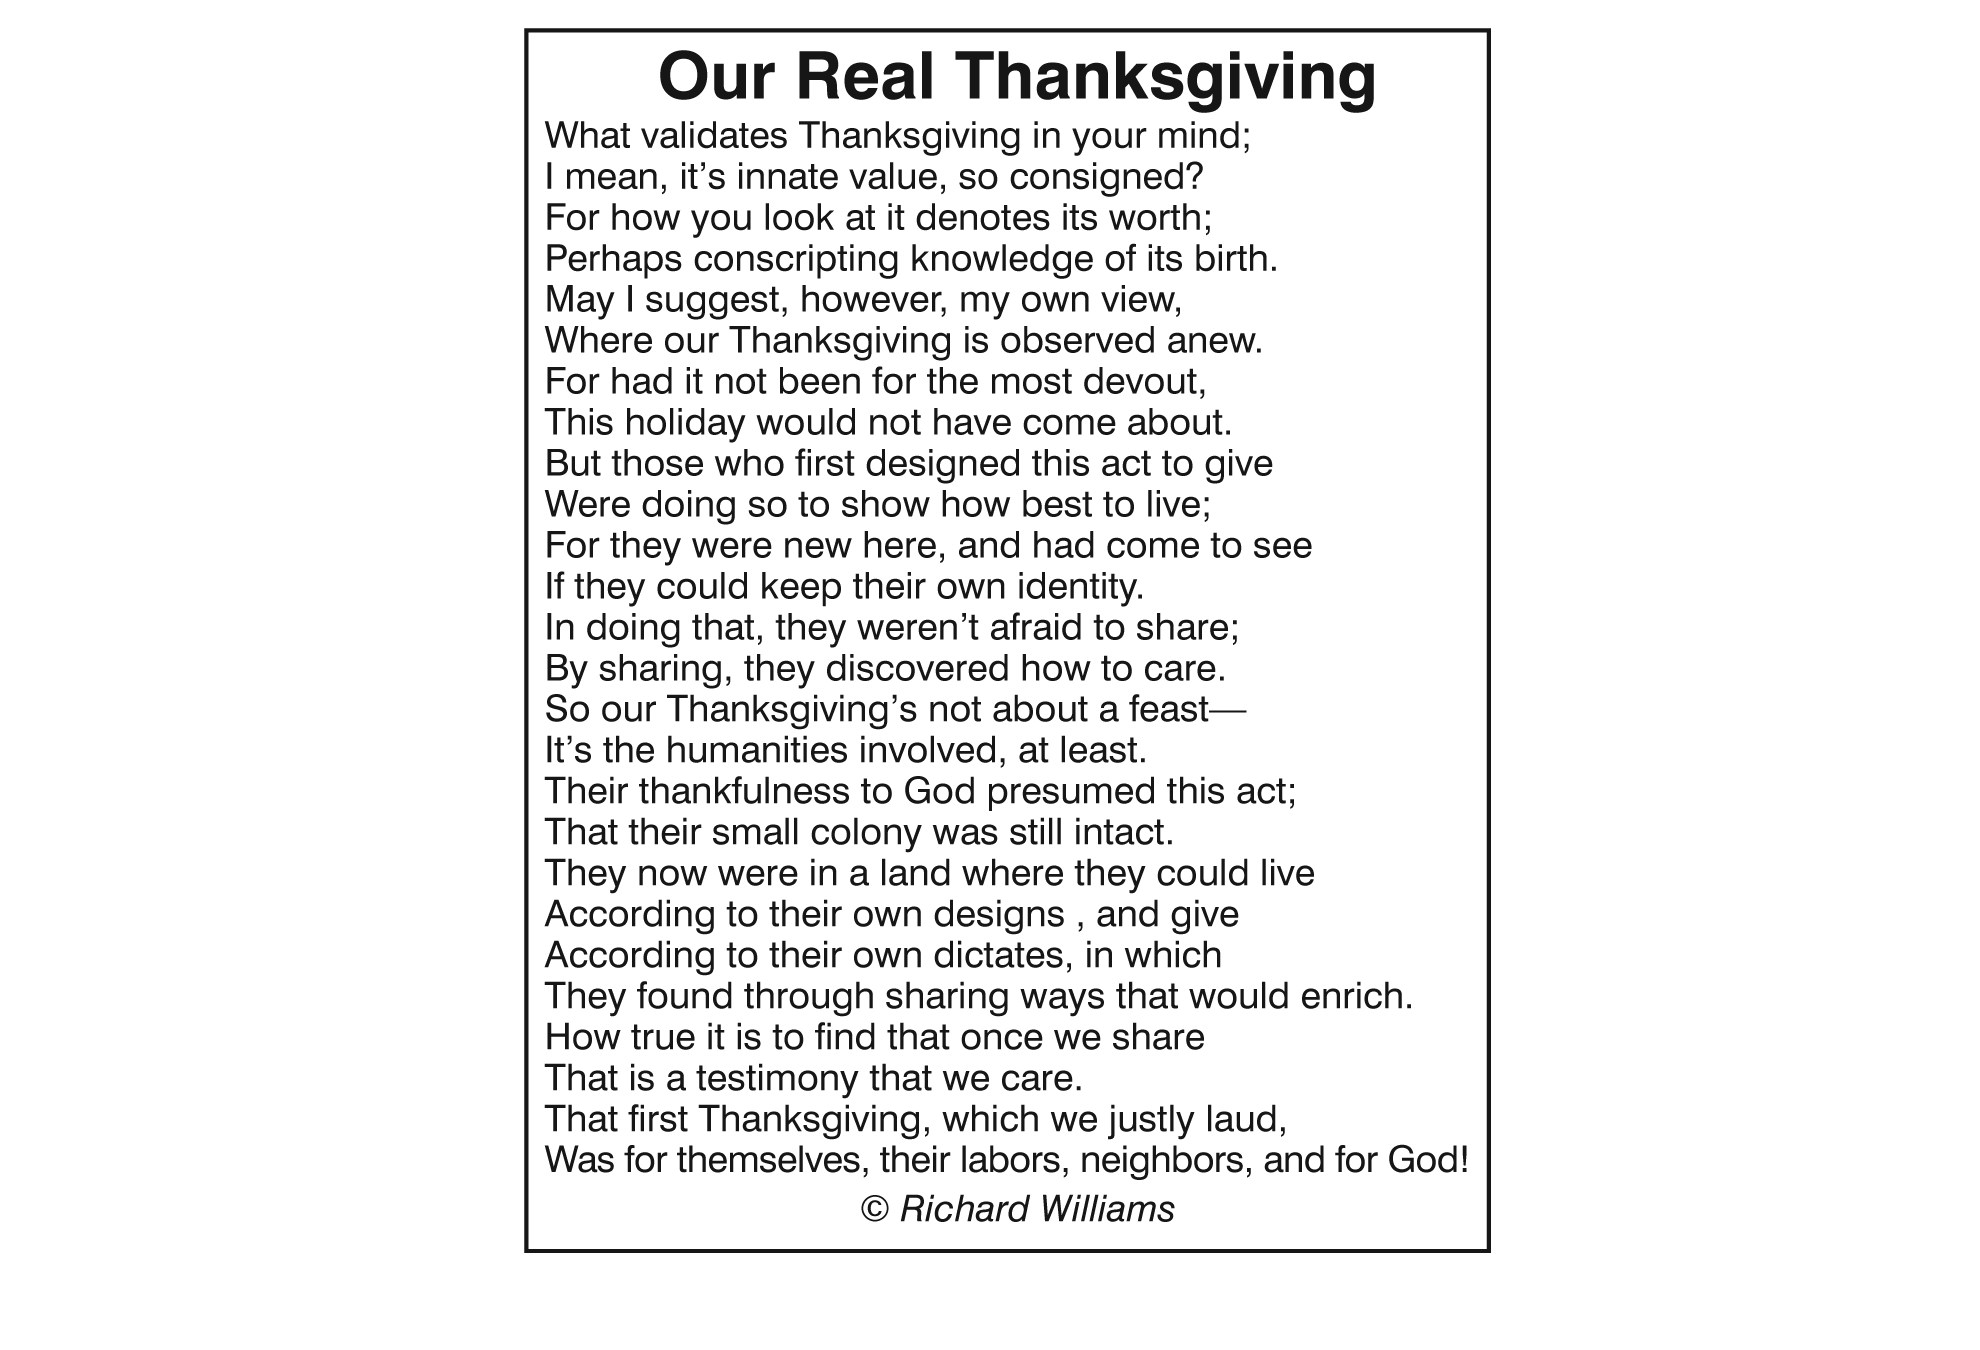 Richard Williams Poem - Our Real Thanksgiving 11-22-18